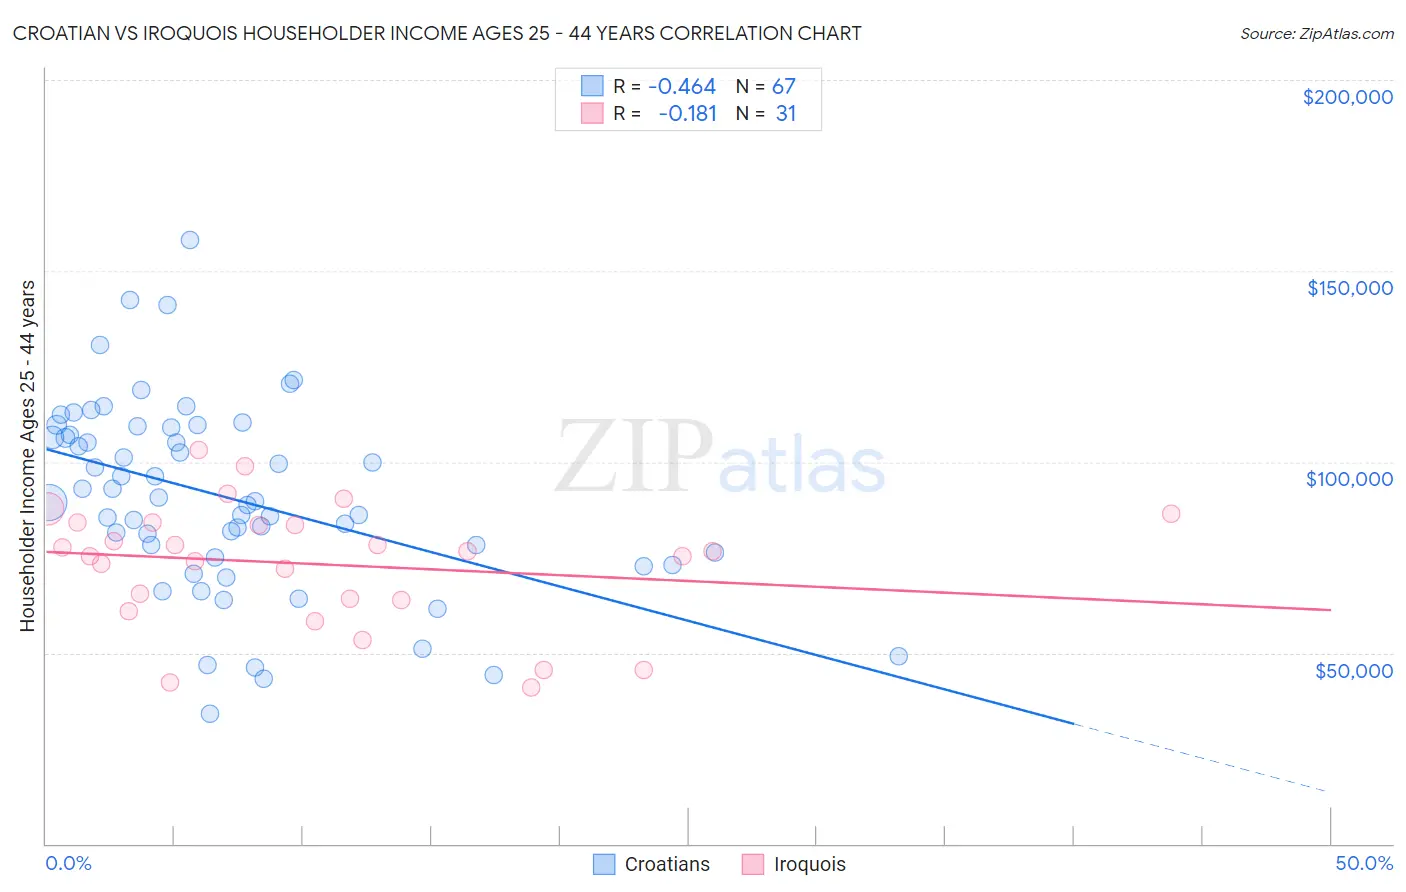 Croatian vs Iroquois Householder Income Ages 25 - 44 years